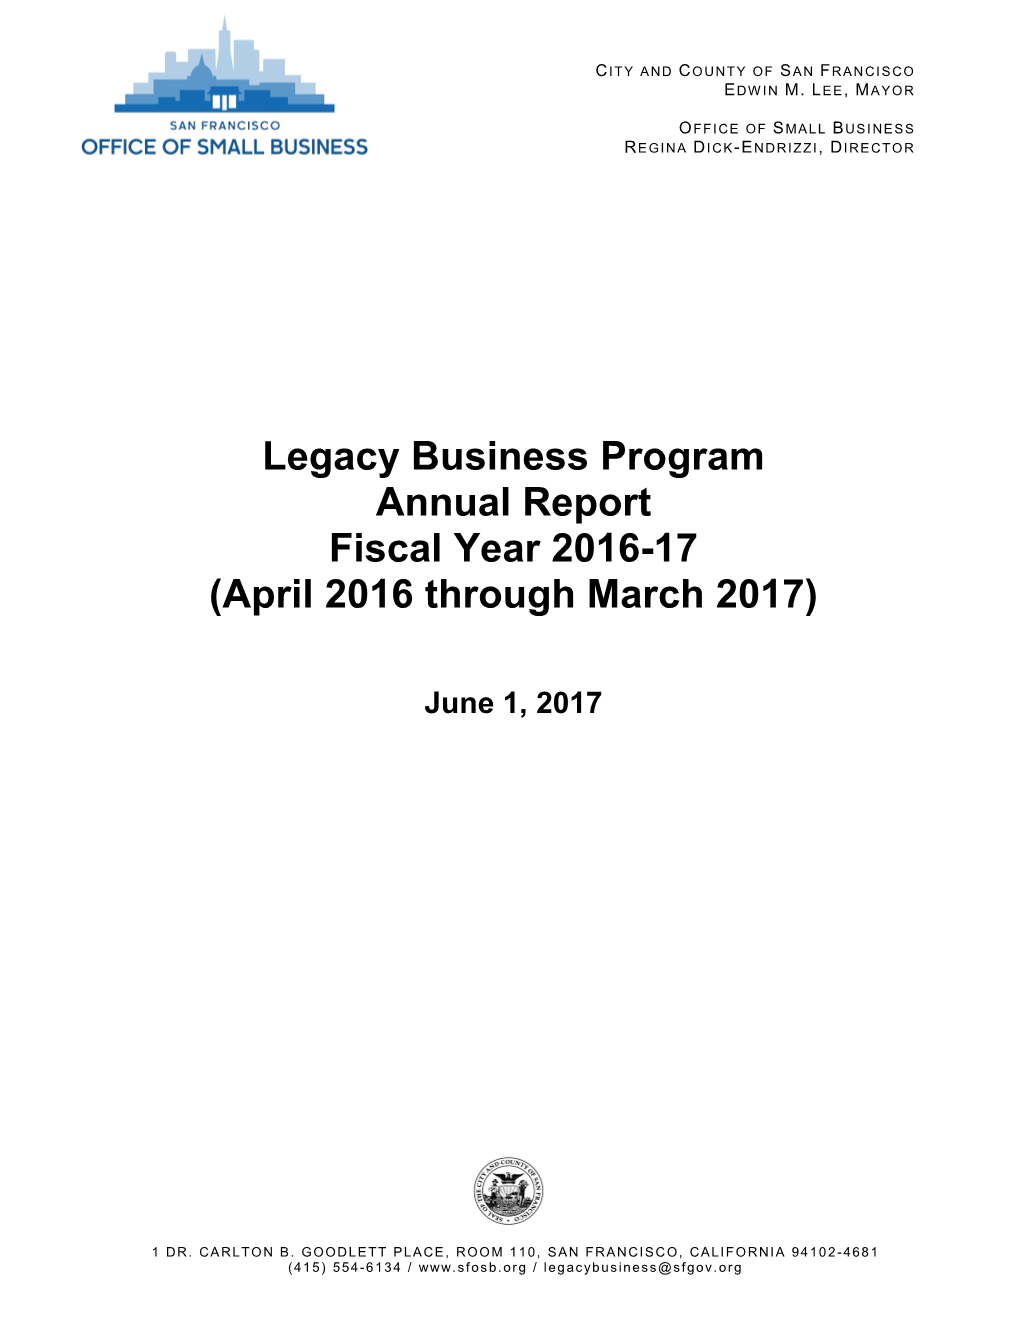 Legacy Business Program Annual Report Fiscal Year 2016-17 (April 2016 Through March 2017)